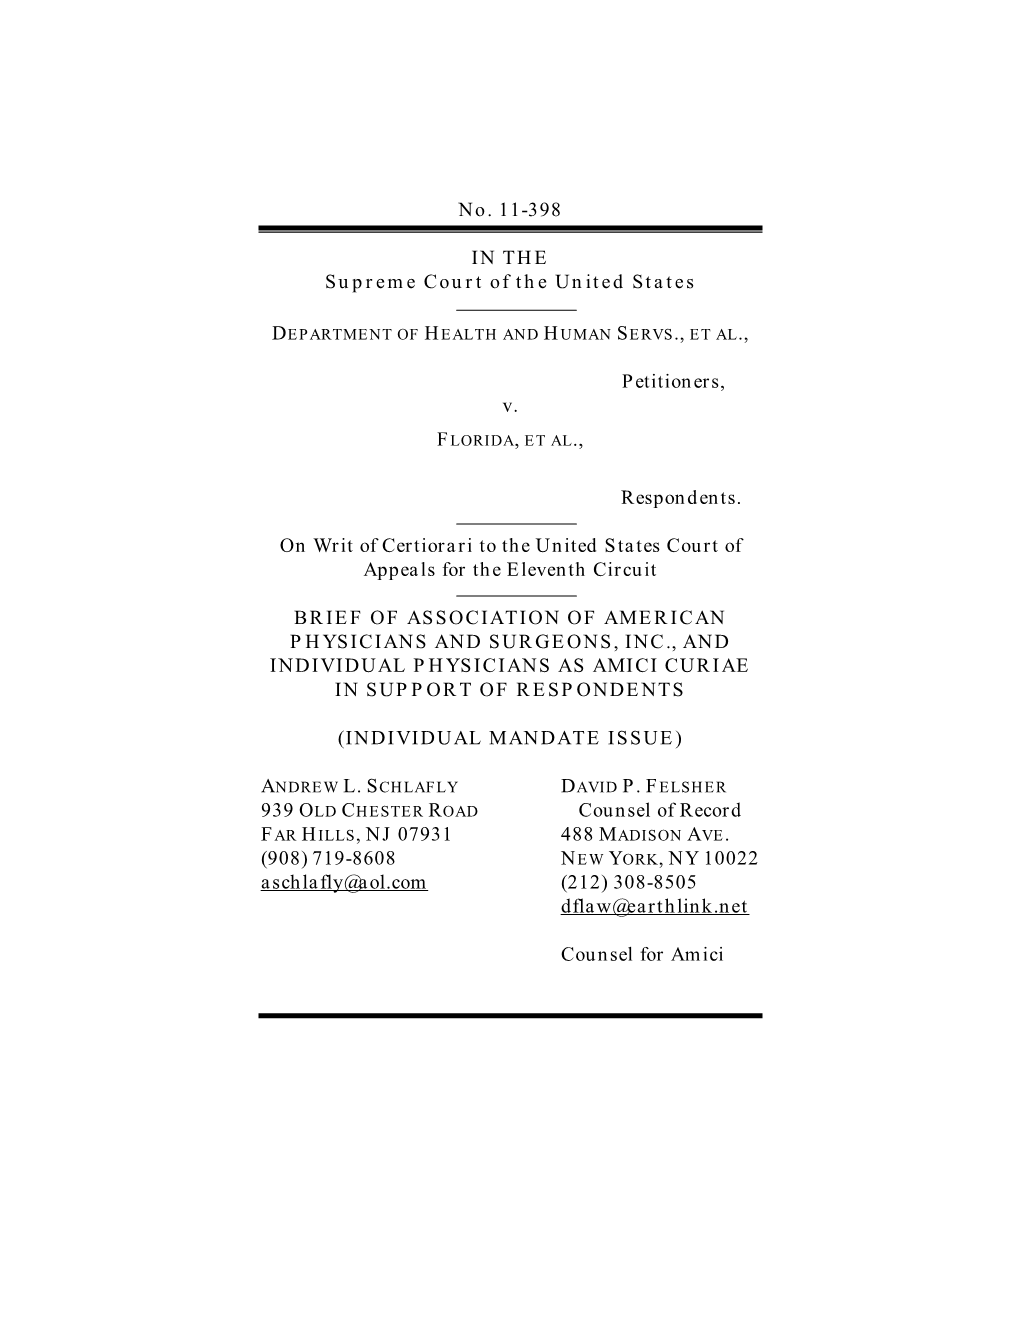 No. 11-398 in the Supreme Court of the United States Petitioners, V